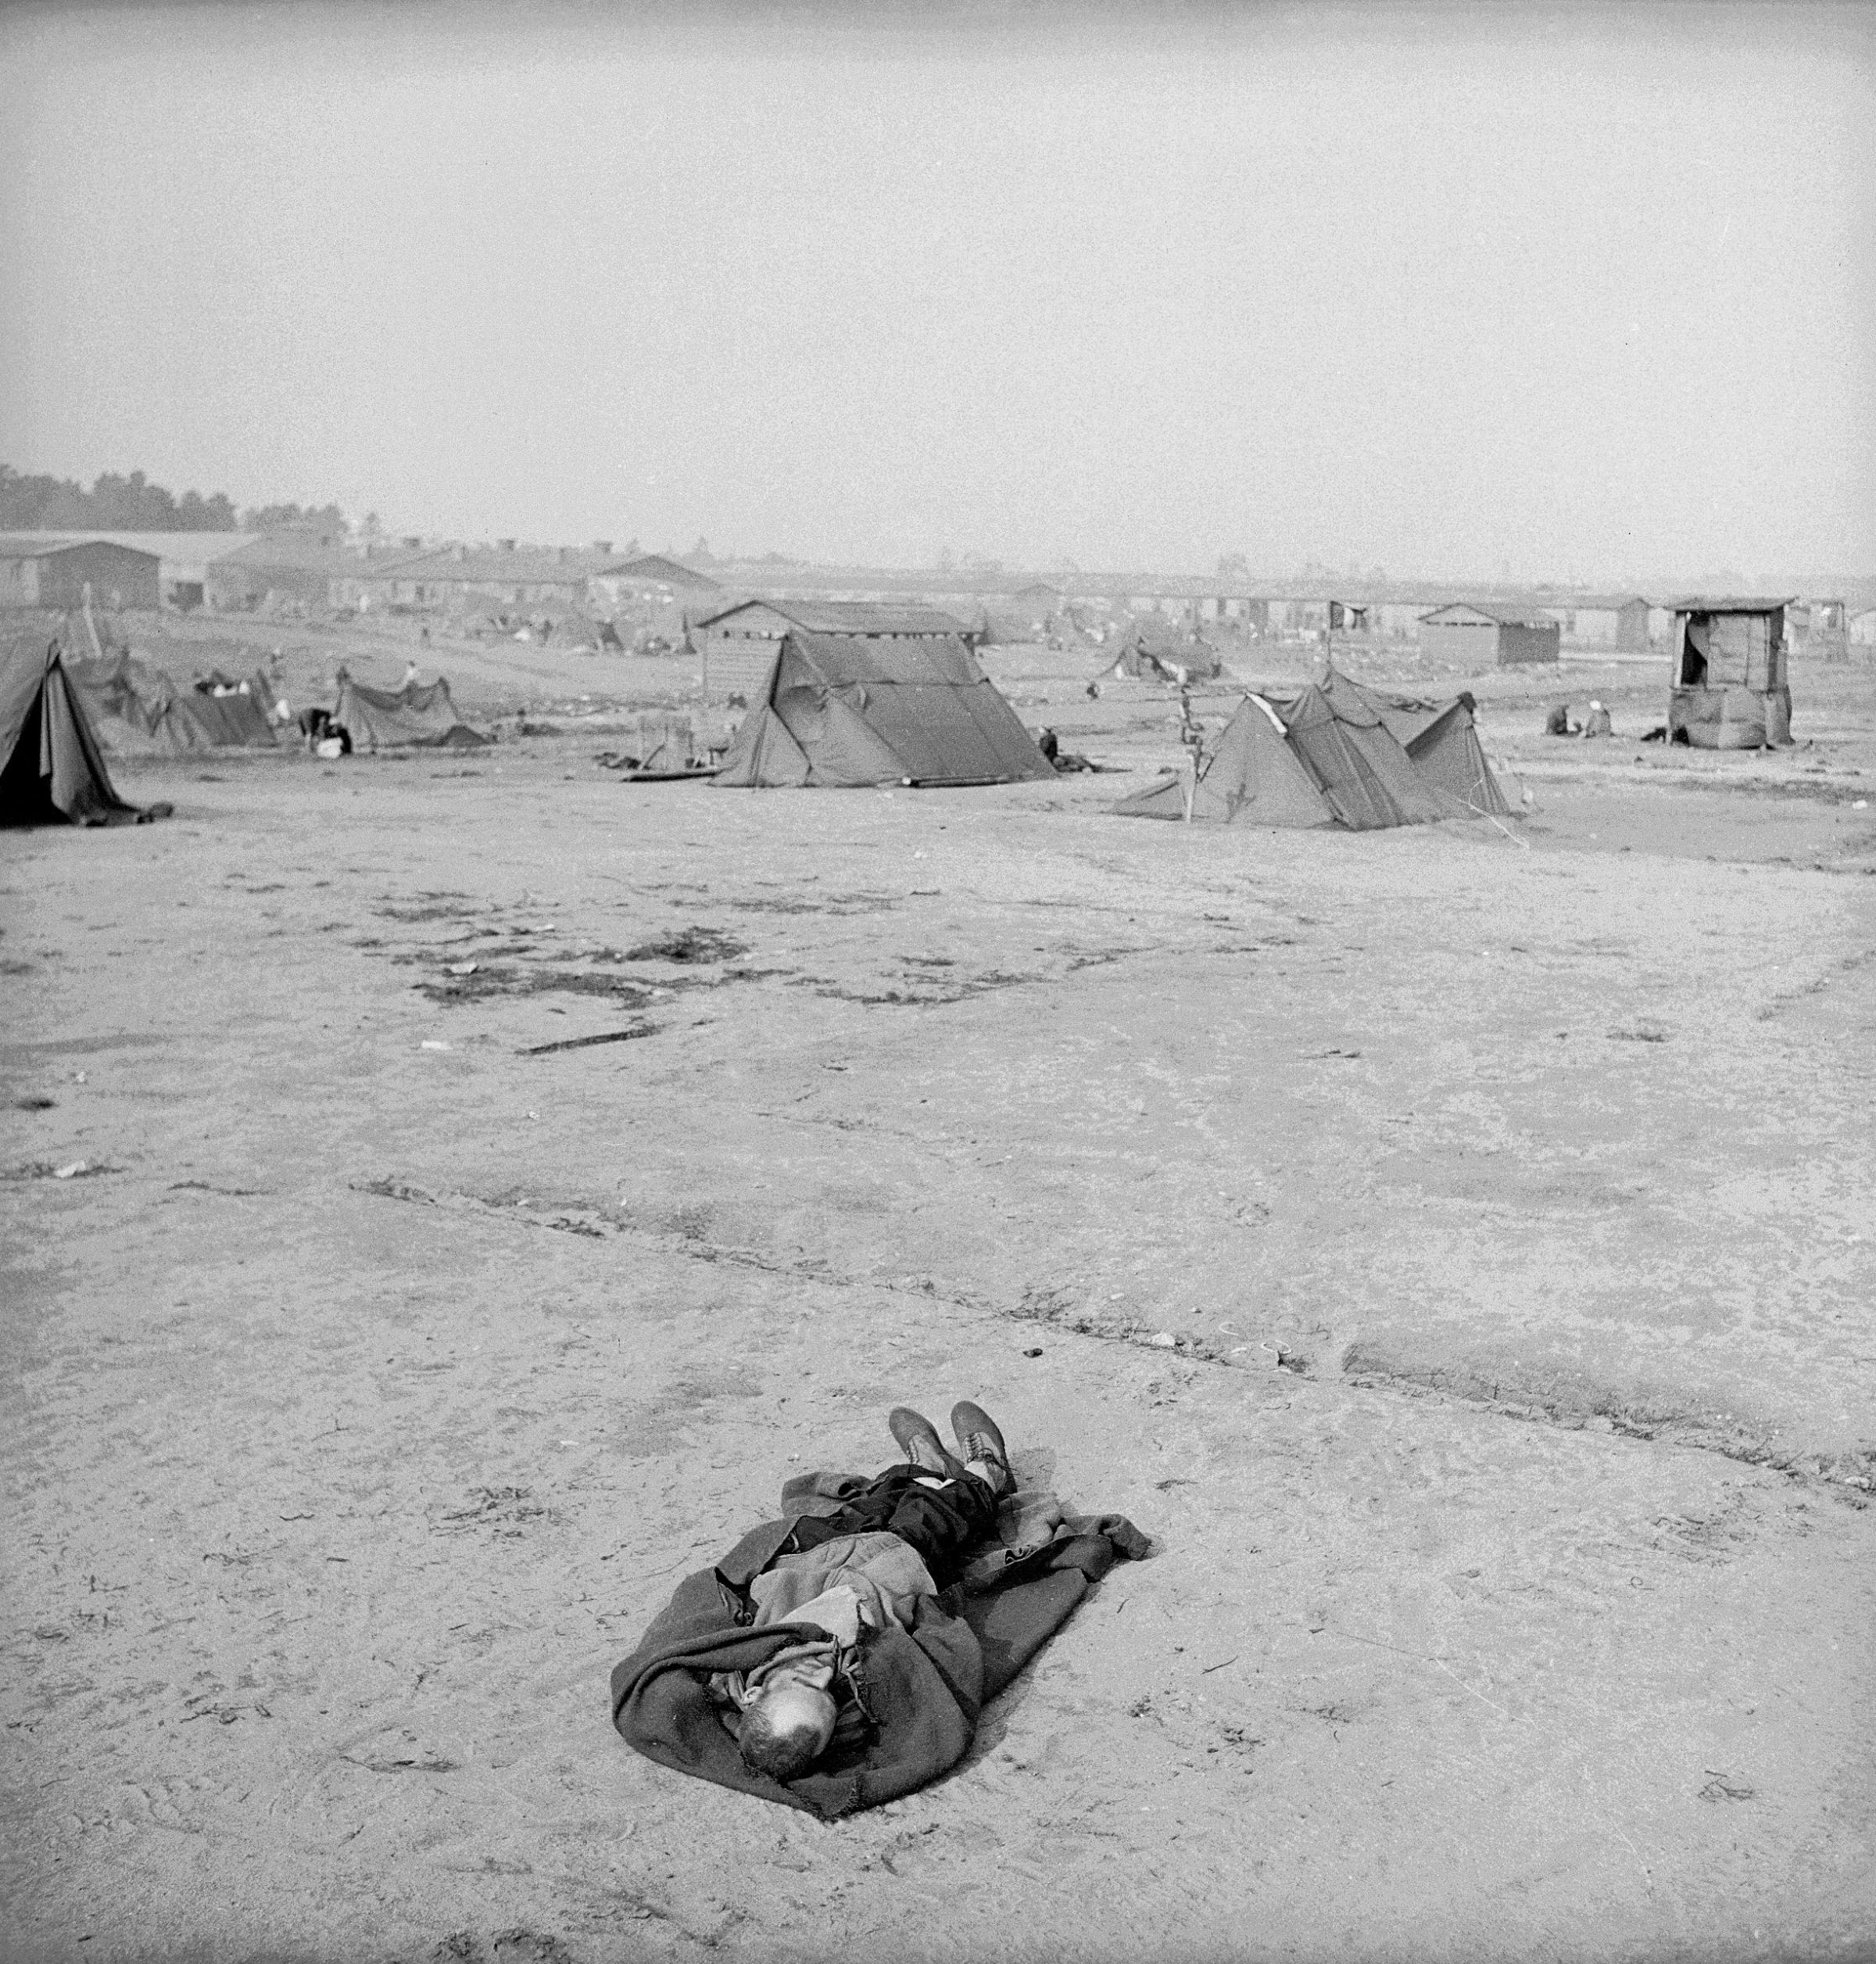 The body of a dead inmate at Bergen-Belsen, photographed shortly after the liberation of the camp by Allied troop, April 1945.